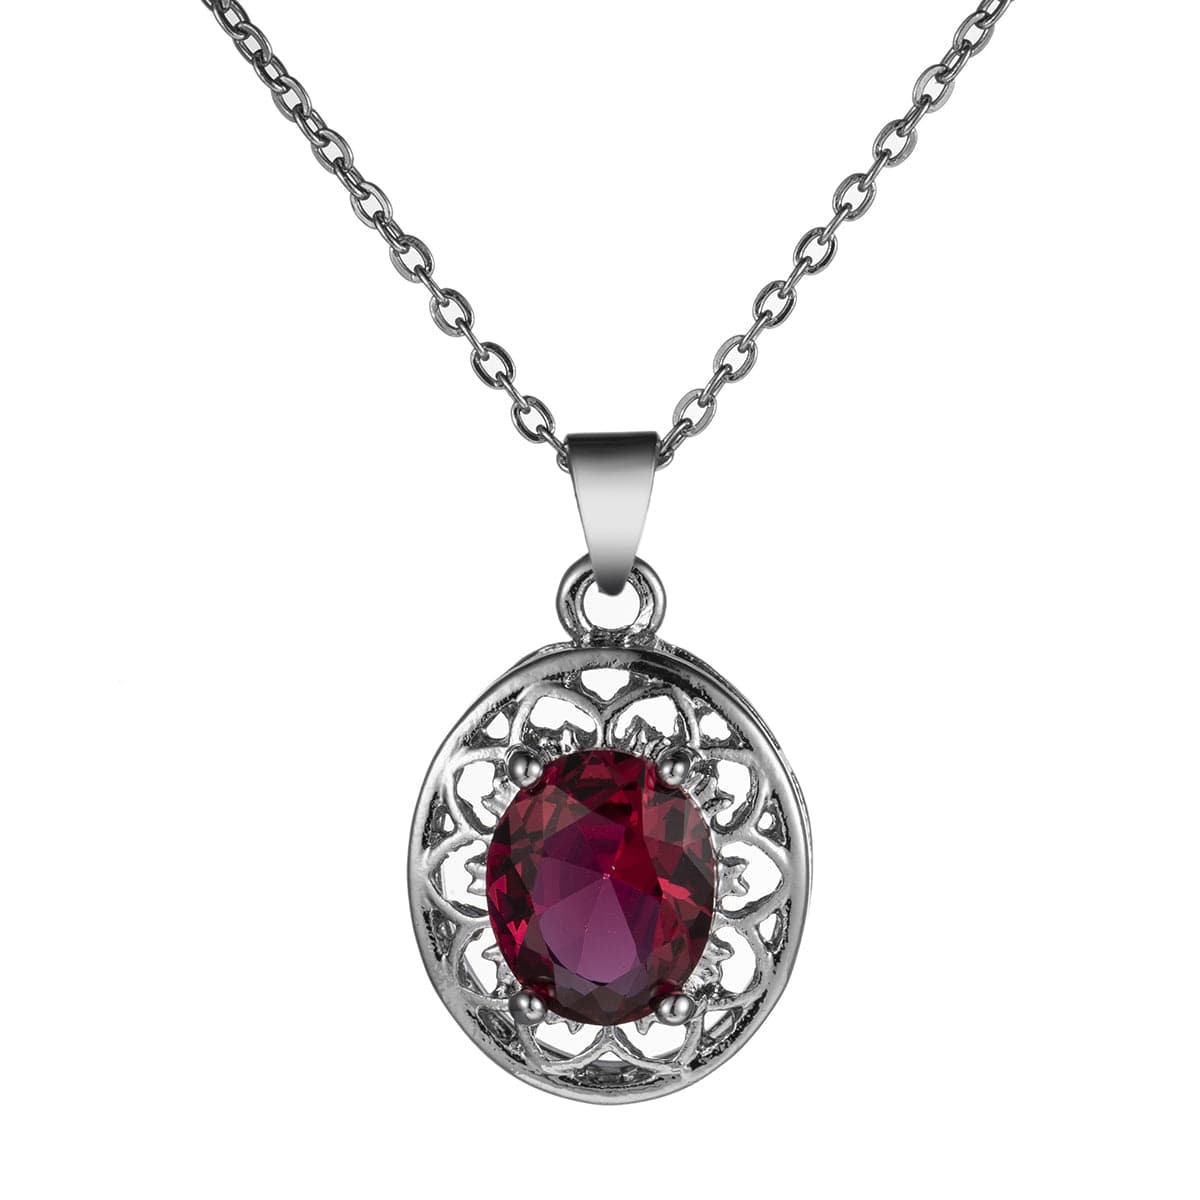 Rose Crystal & Silver-Plated Floral Pendant Necklace